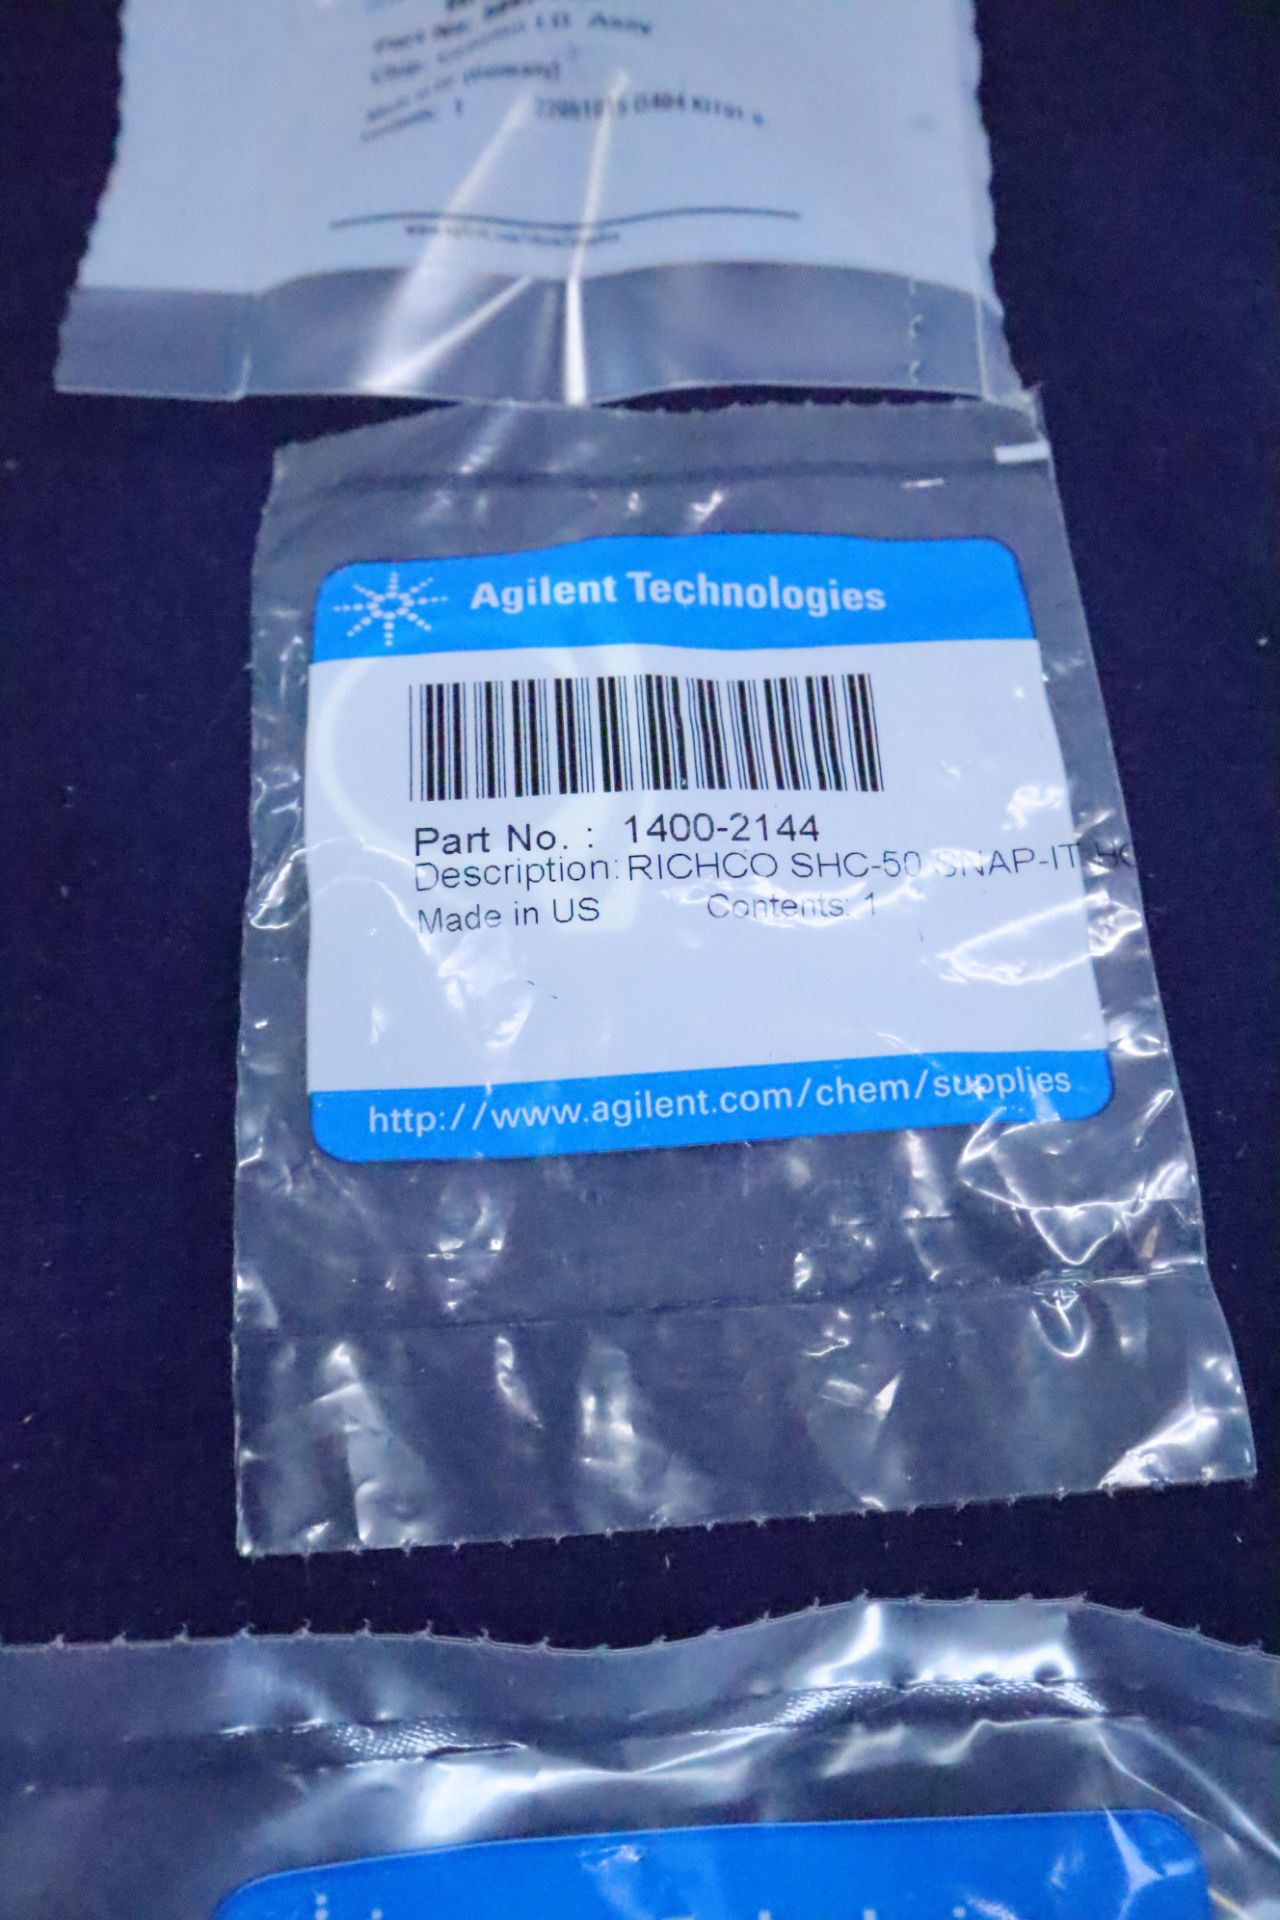 Agilent Technologies OEM Replacement Parts, Booklets and Recovery Drive - Image 14 of 32